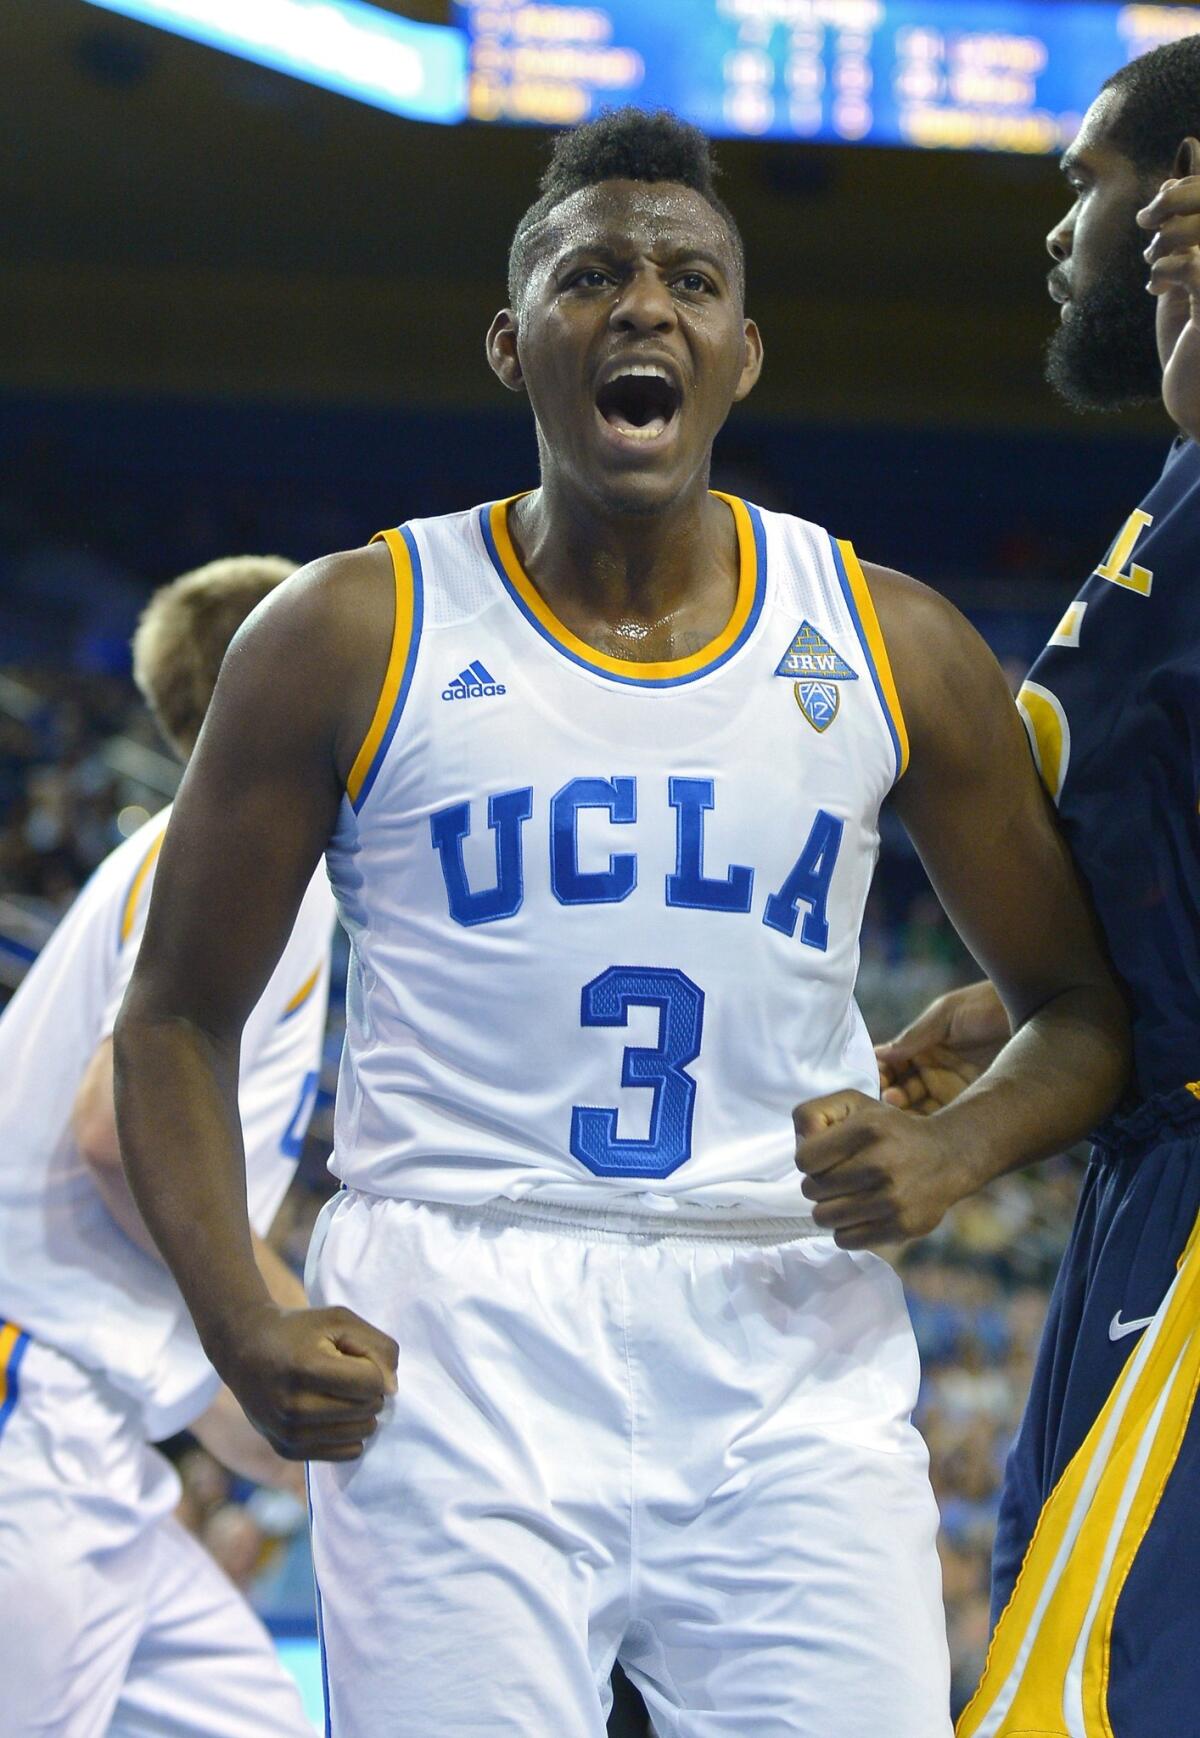 Jordan Adams celebrates after scoring during a game against Drexel in November. The sophomore guard has become a better all-around player for the Bruins this season despite battling adversity on and off the court.